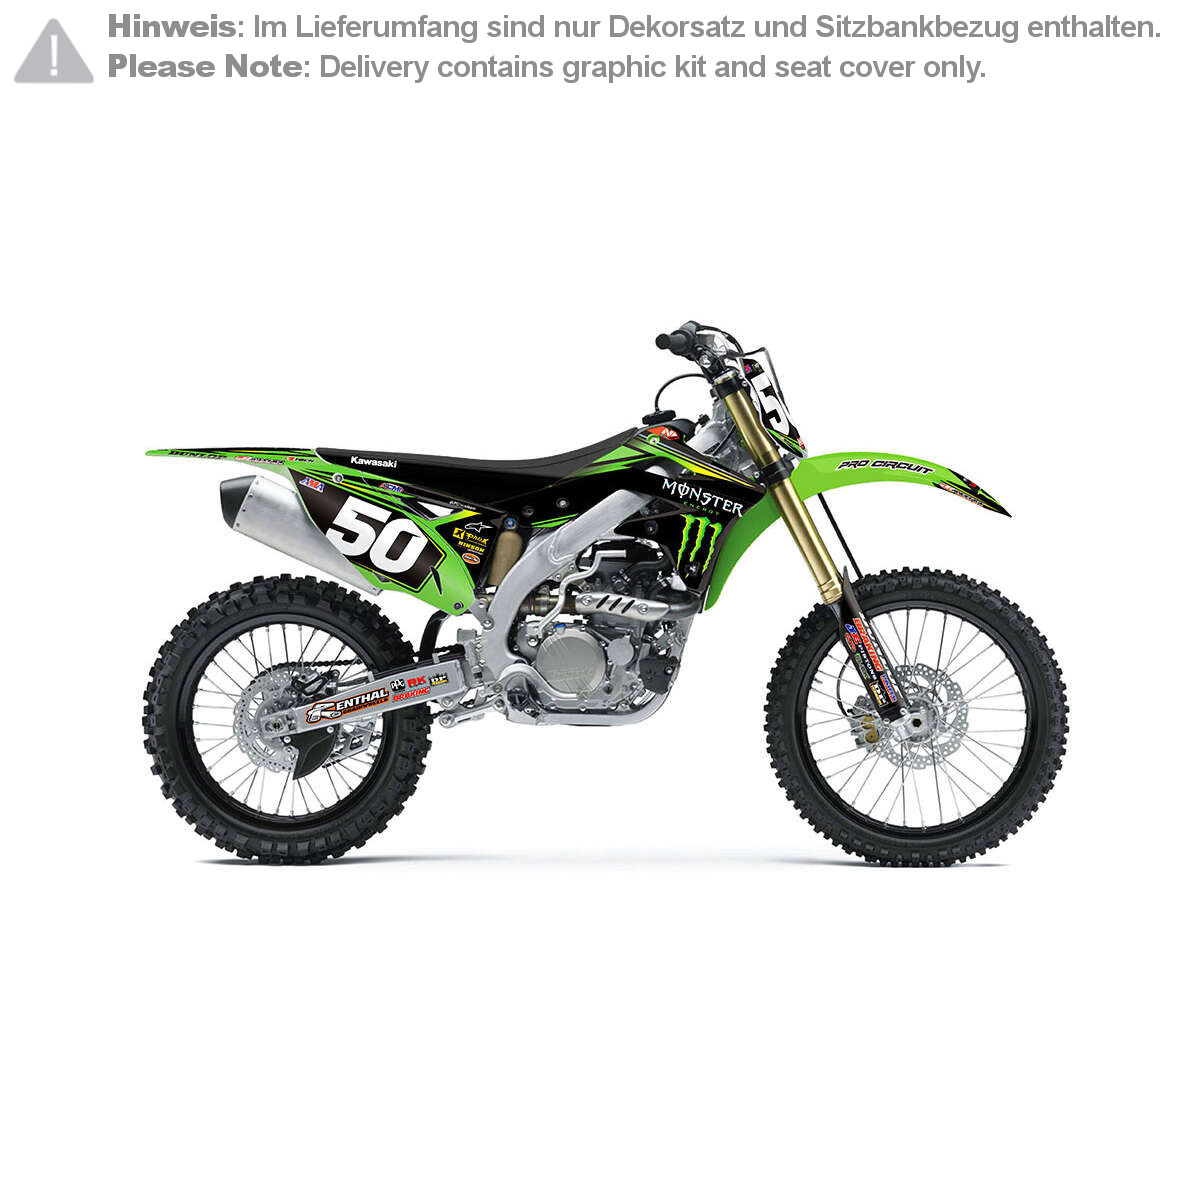 N-Style Graphic Kit with Seat Cover Team Pro Circuit 2015 Kawasaki KX-F 450 12-15, Green/Black